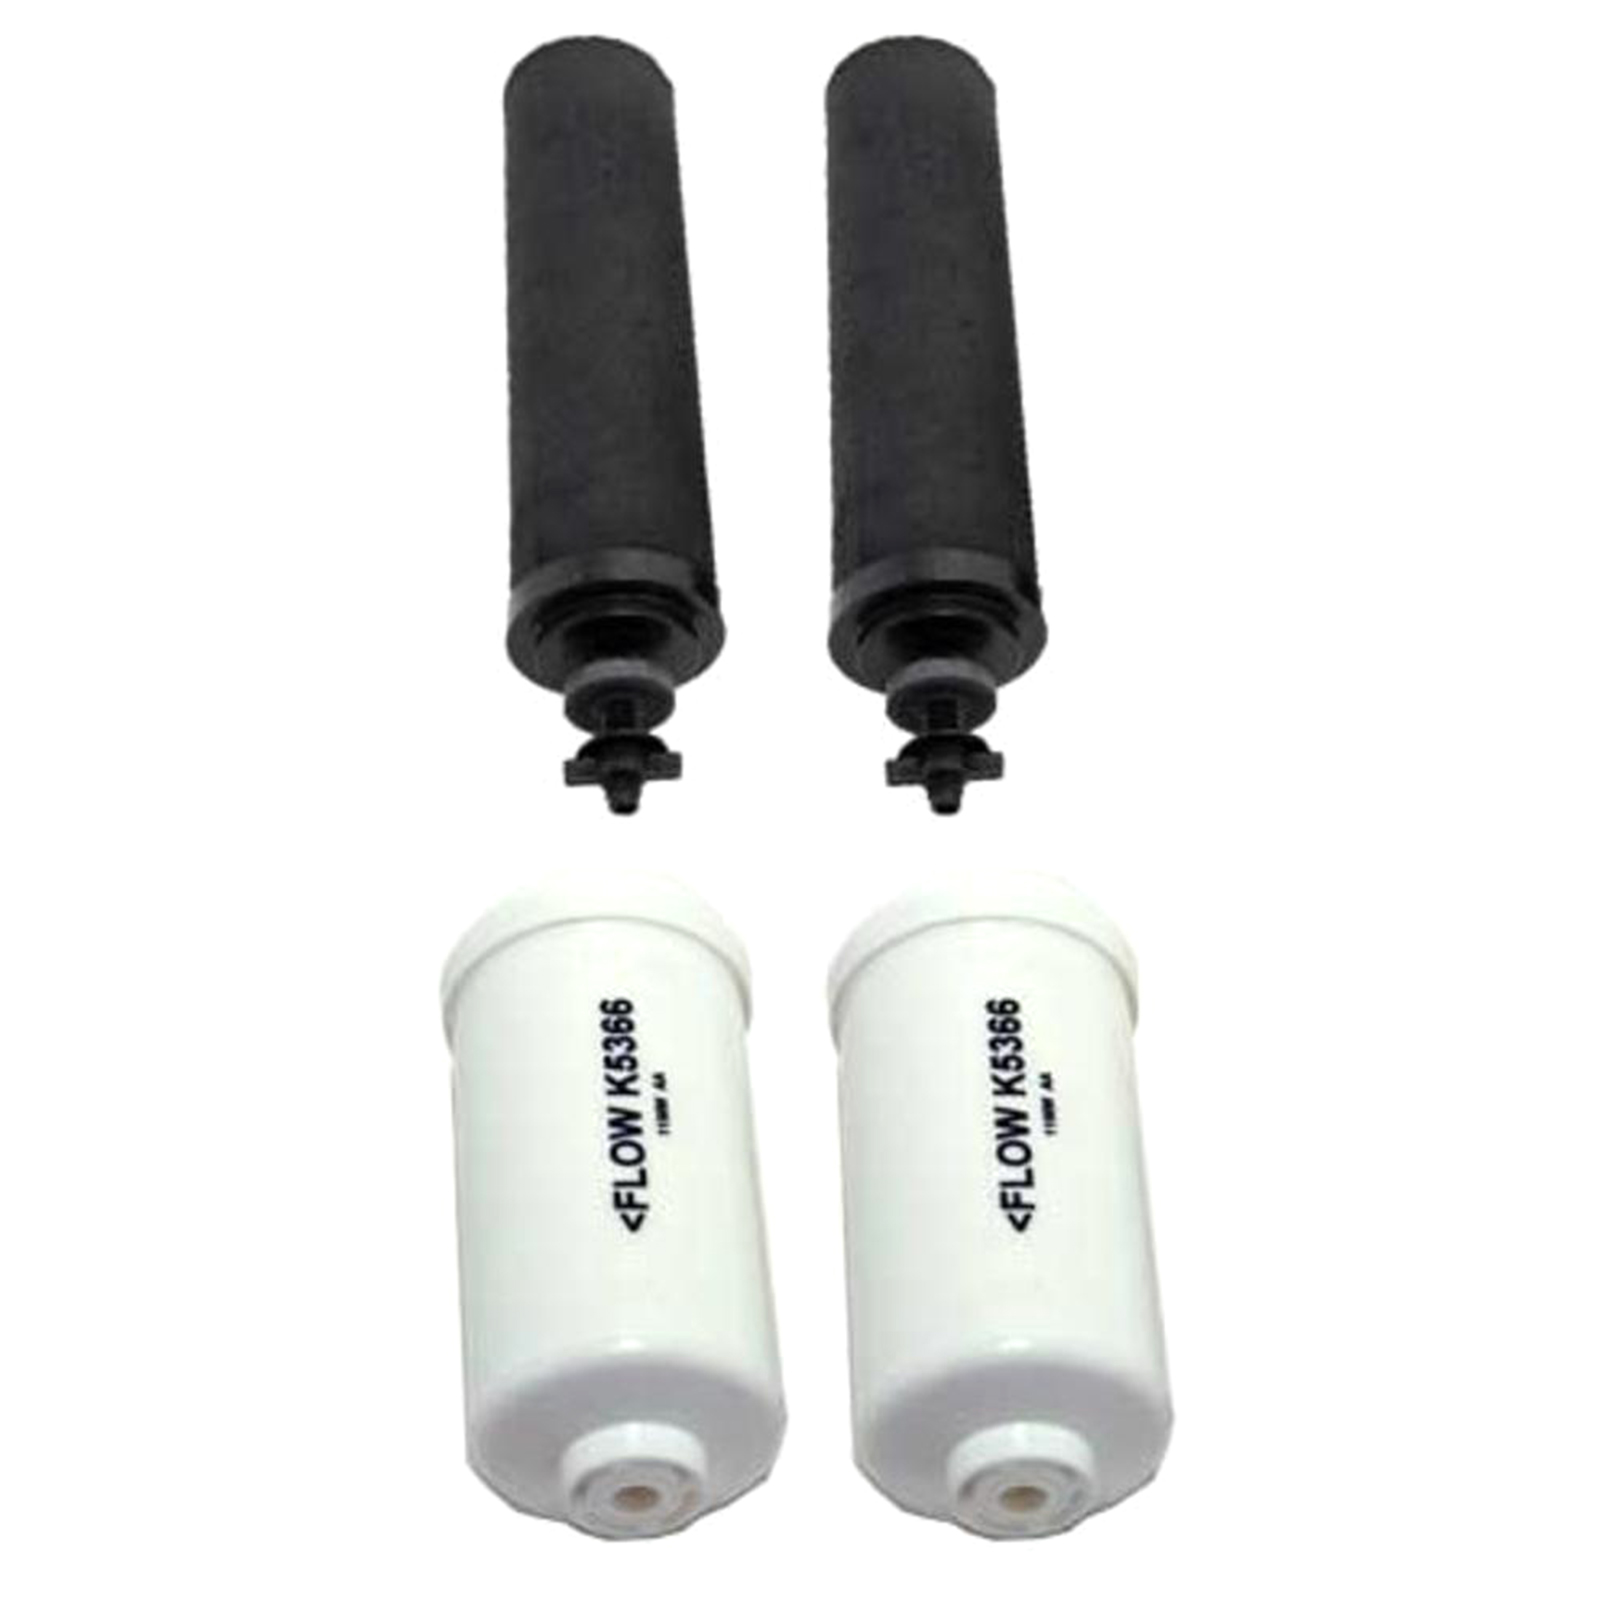 Berkey filters BB9-2 Replacement & Fluoride Filters Combo Pack of 2 Black and 2 Fluoride Filters